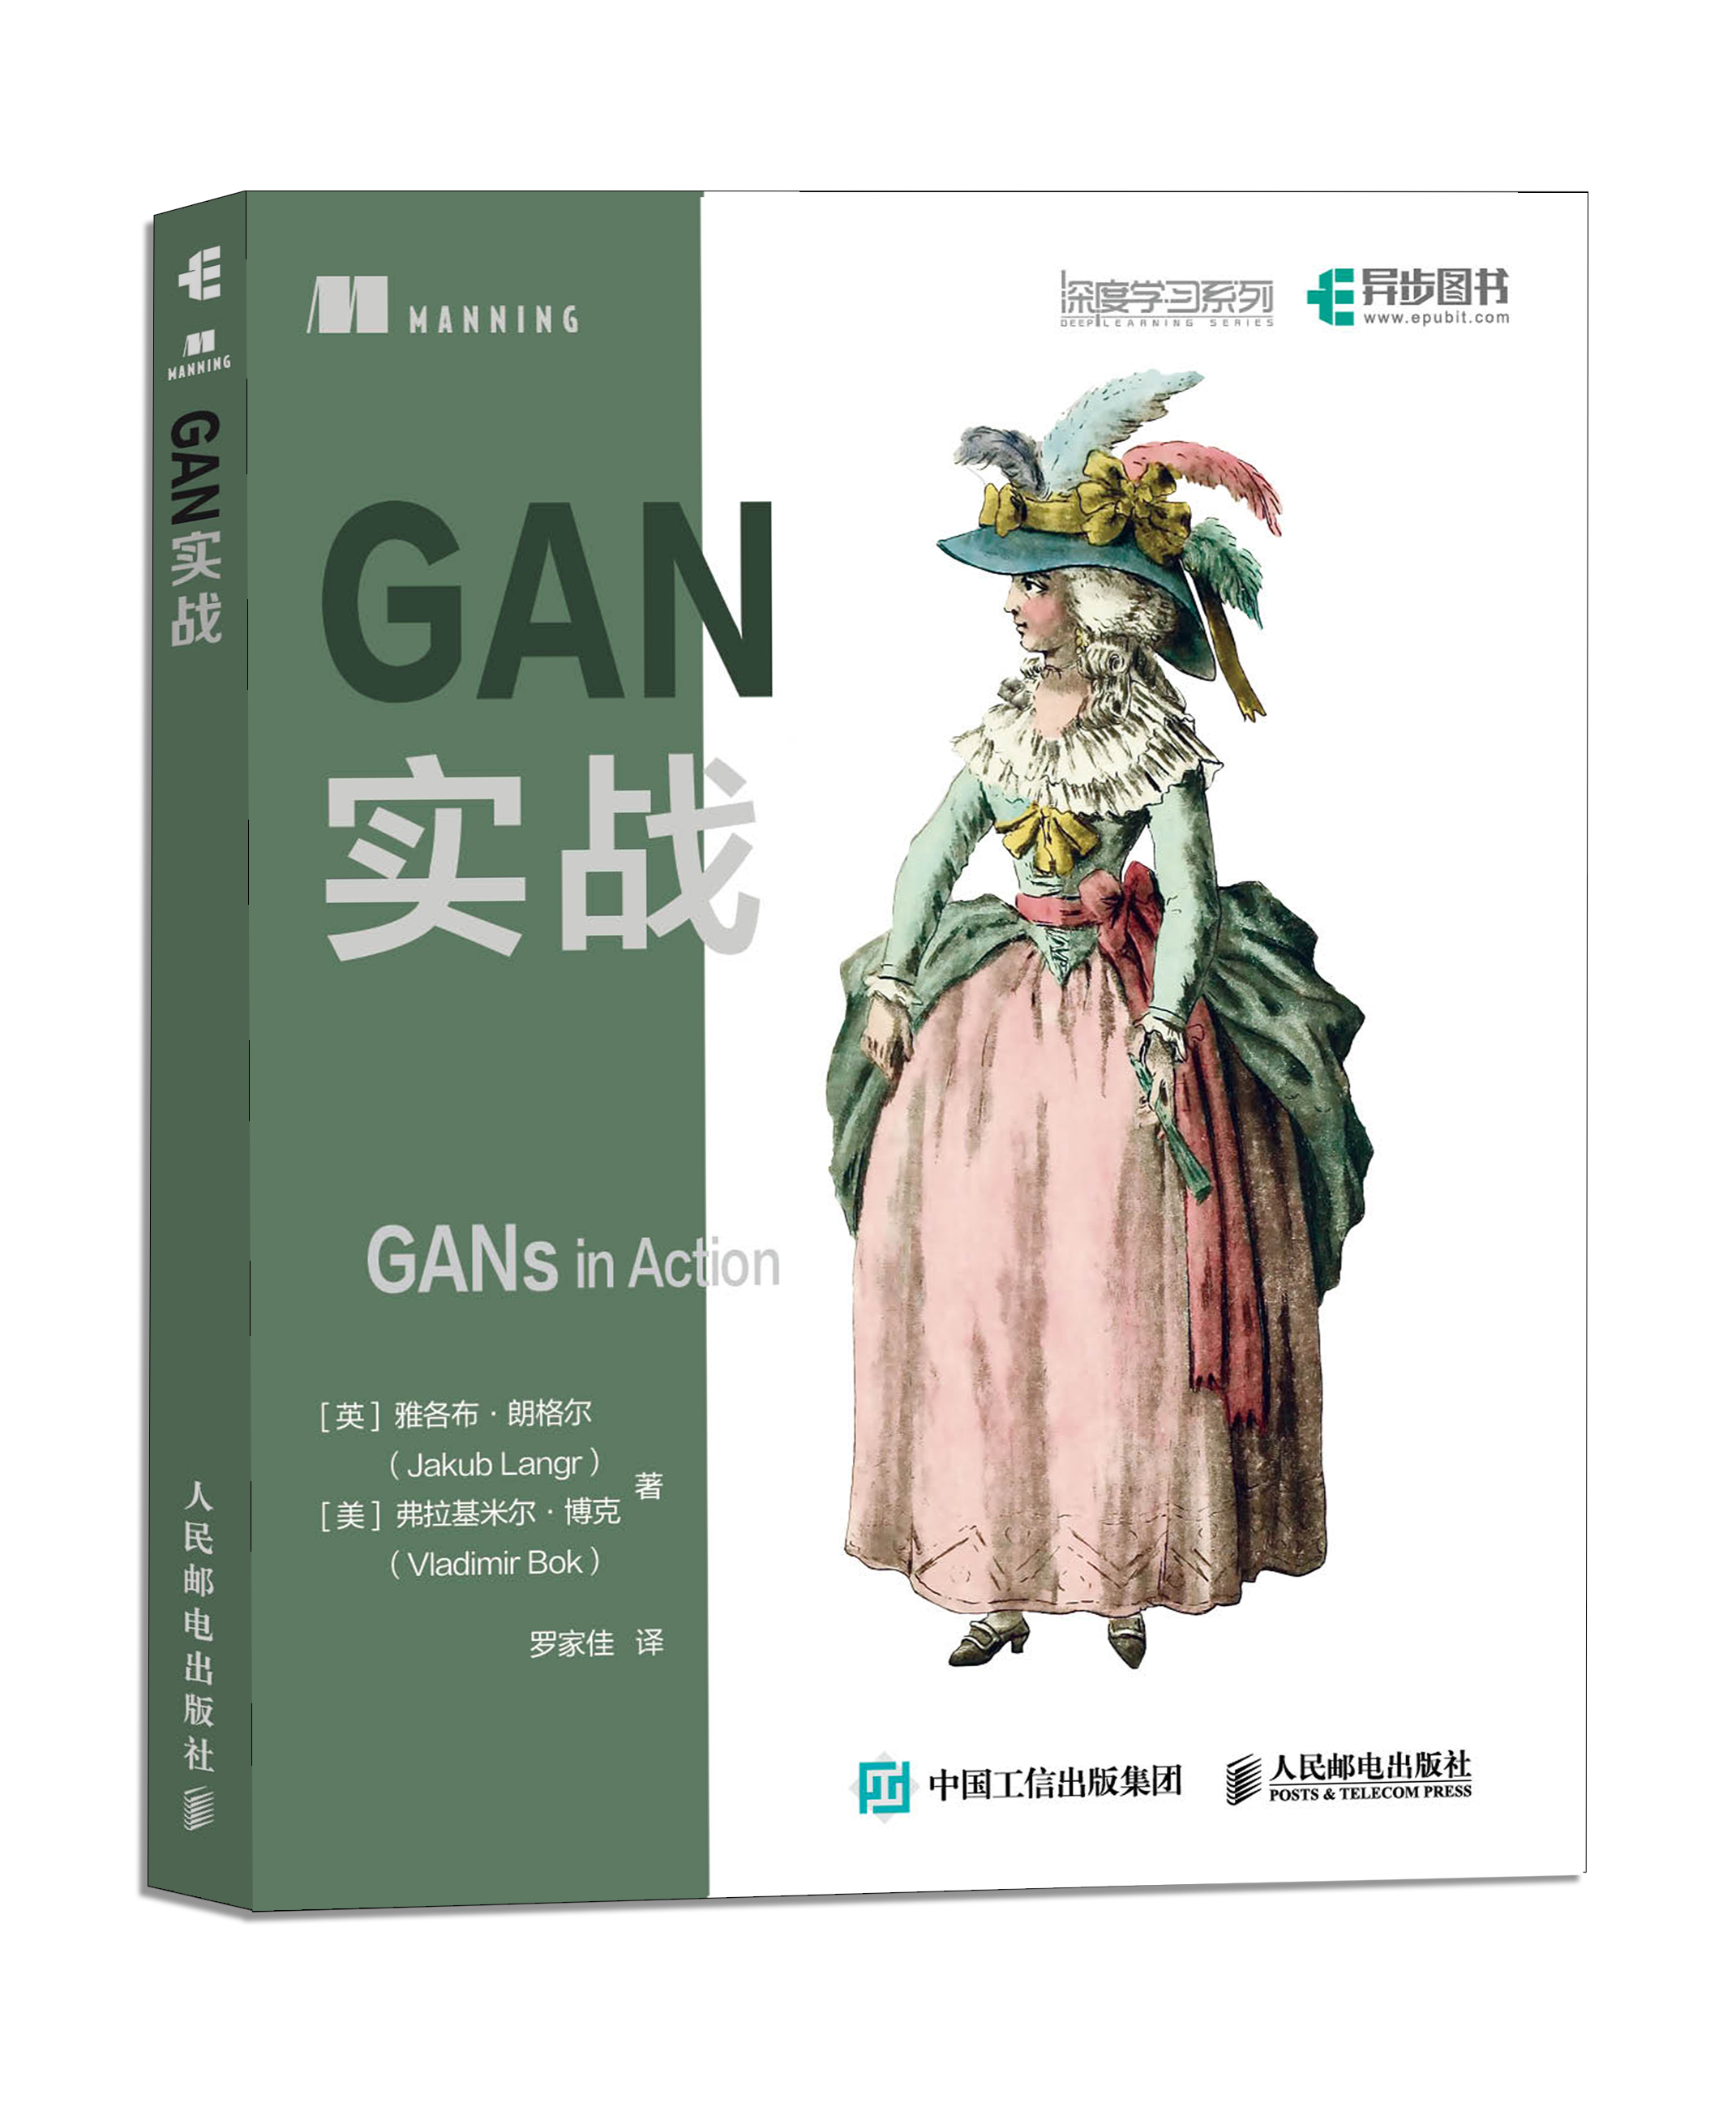 GAN (Generative Adversarial Network) has published a practical book, what about it?